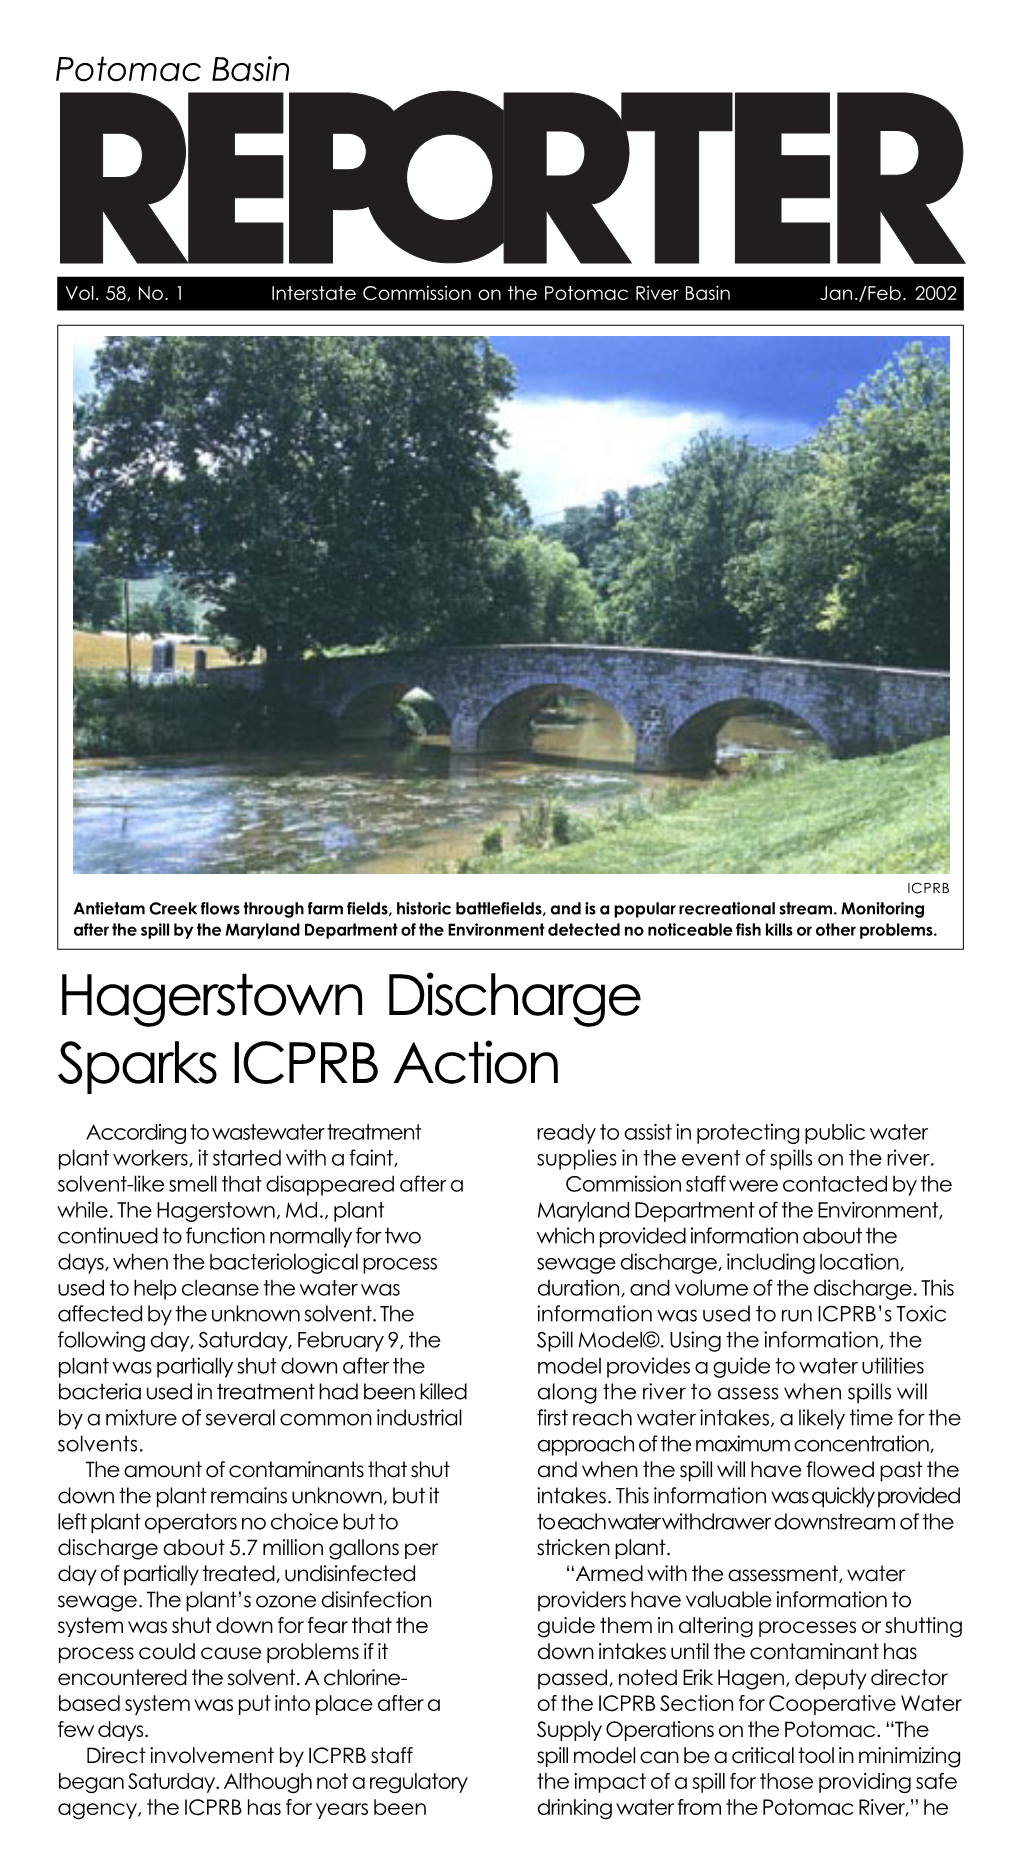 Hagerstown Discharge Sparks ICPRB Action